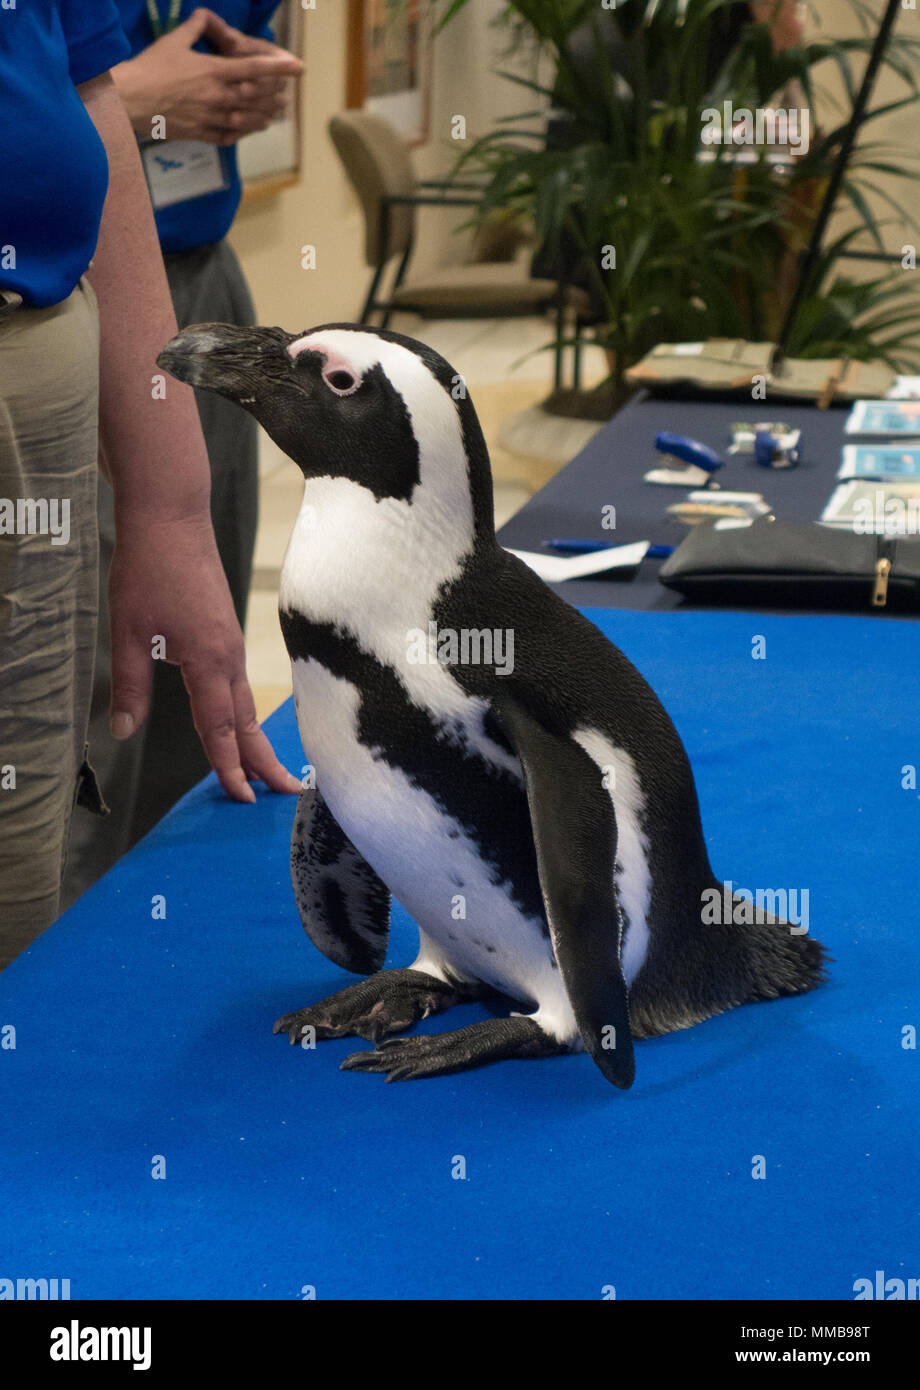 Crowds gather to see a penguin on display at a local office building by the National Aviary in Pittsburgh, Pennsylvania Stock Photo